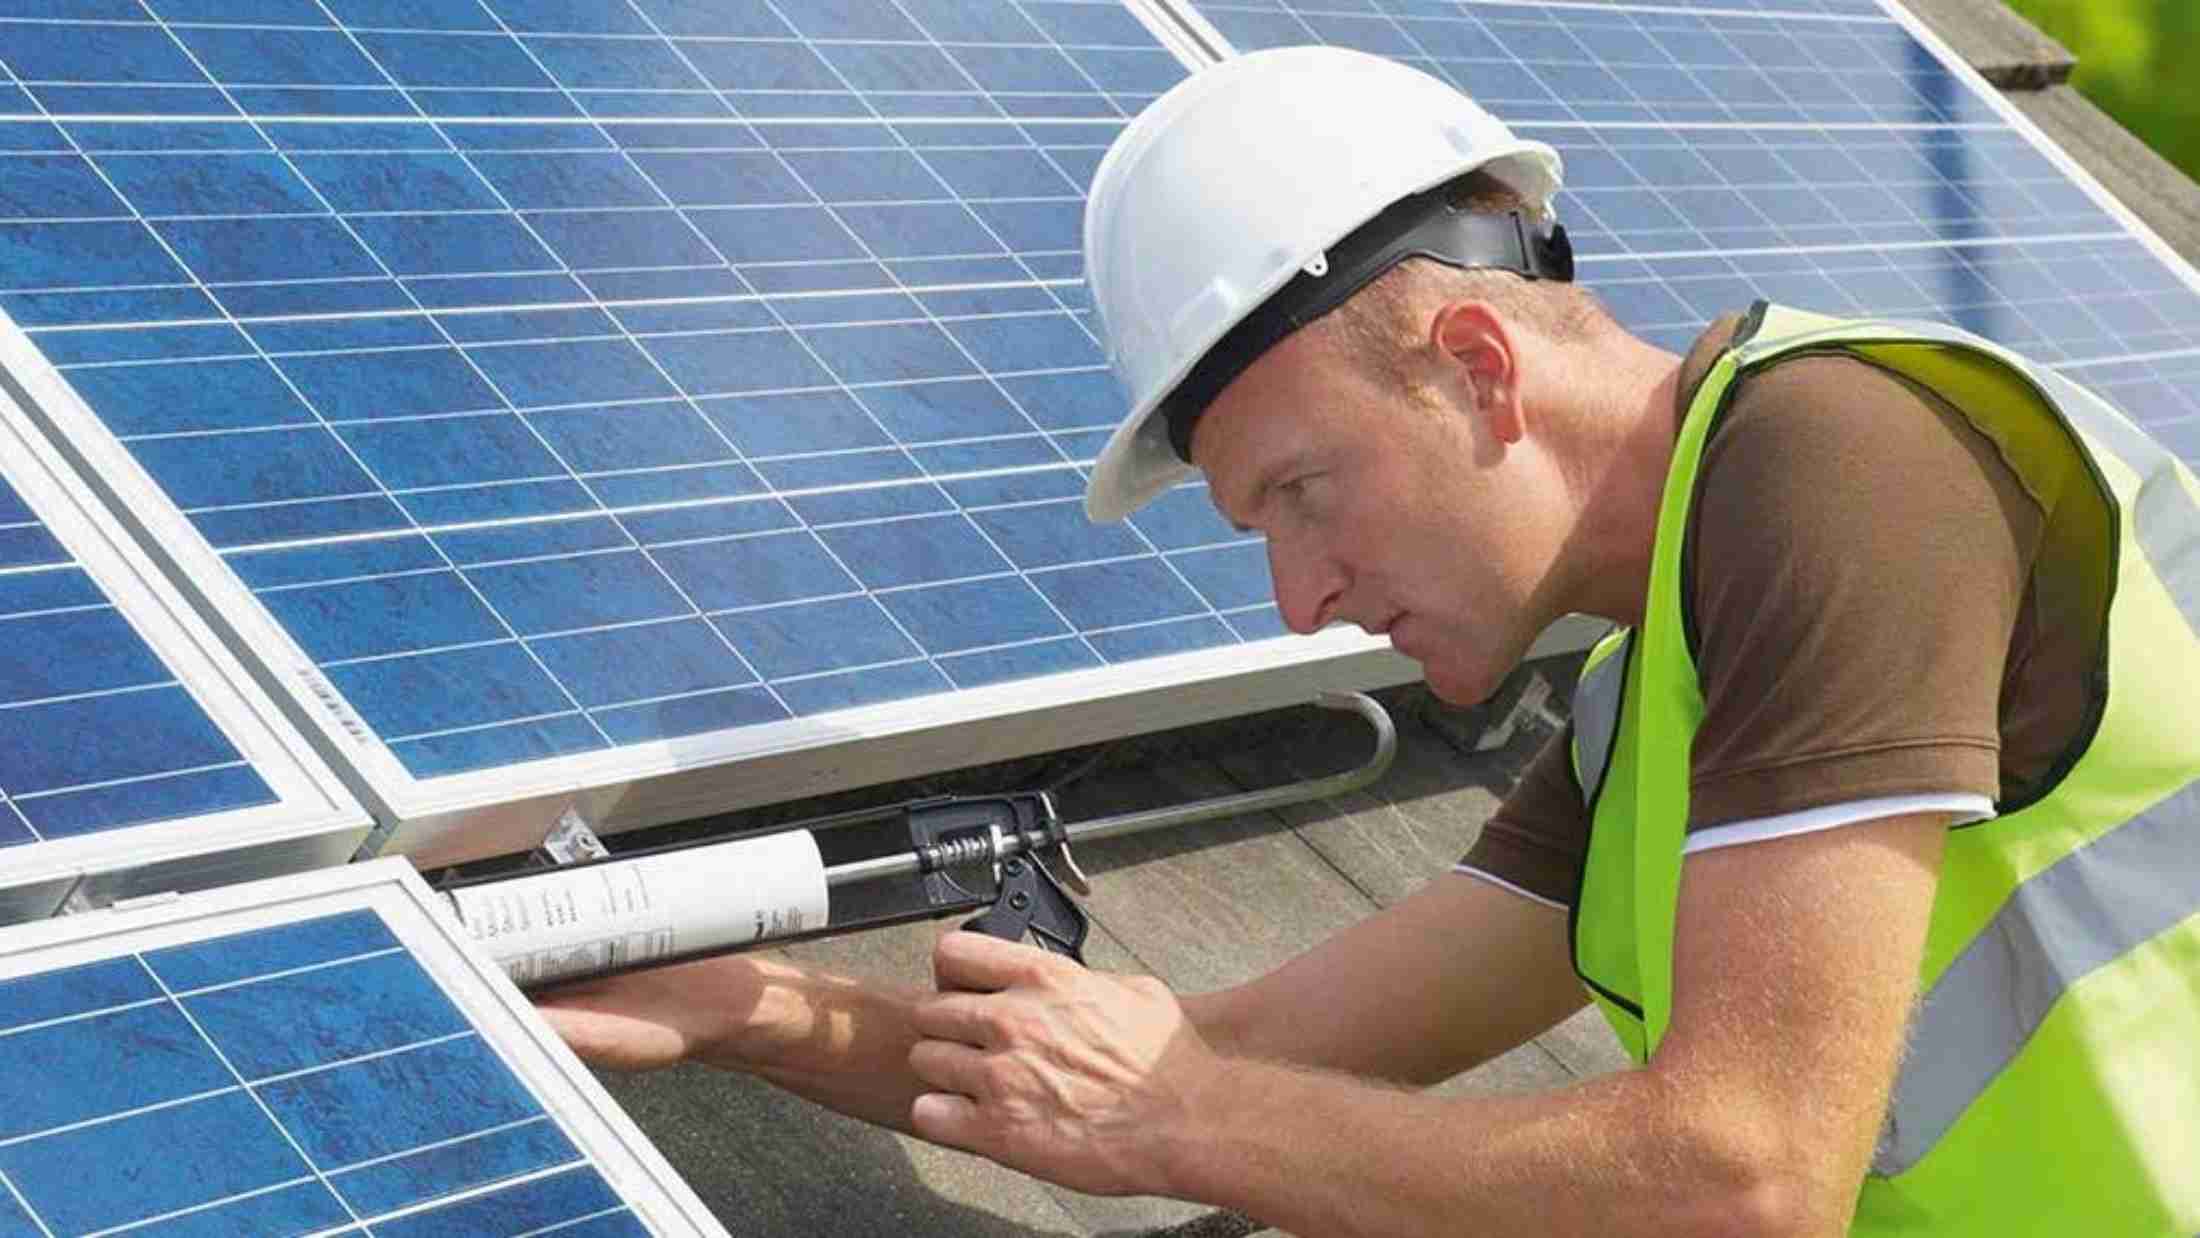 A man installing solar panel on a house roof